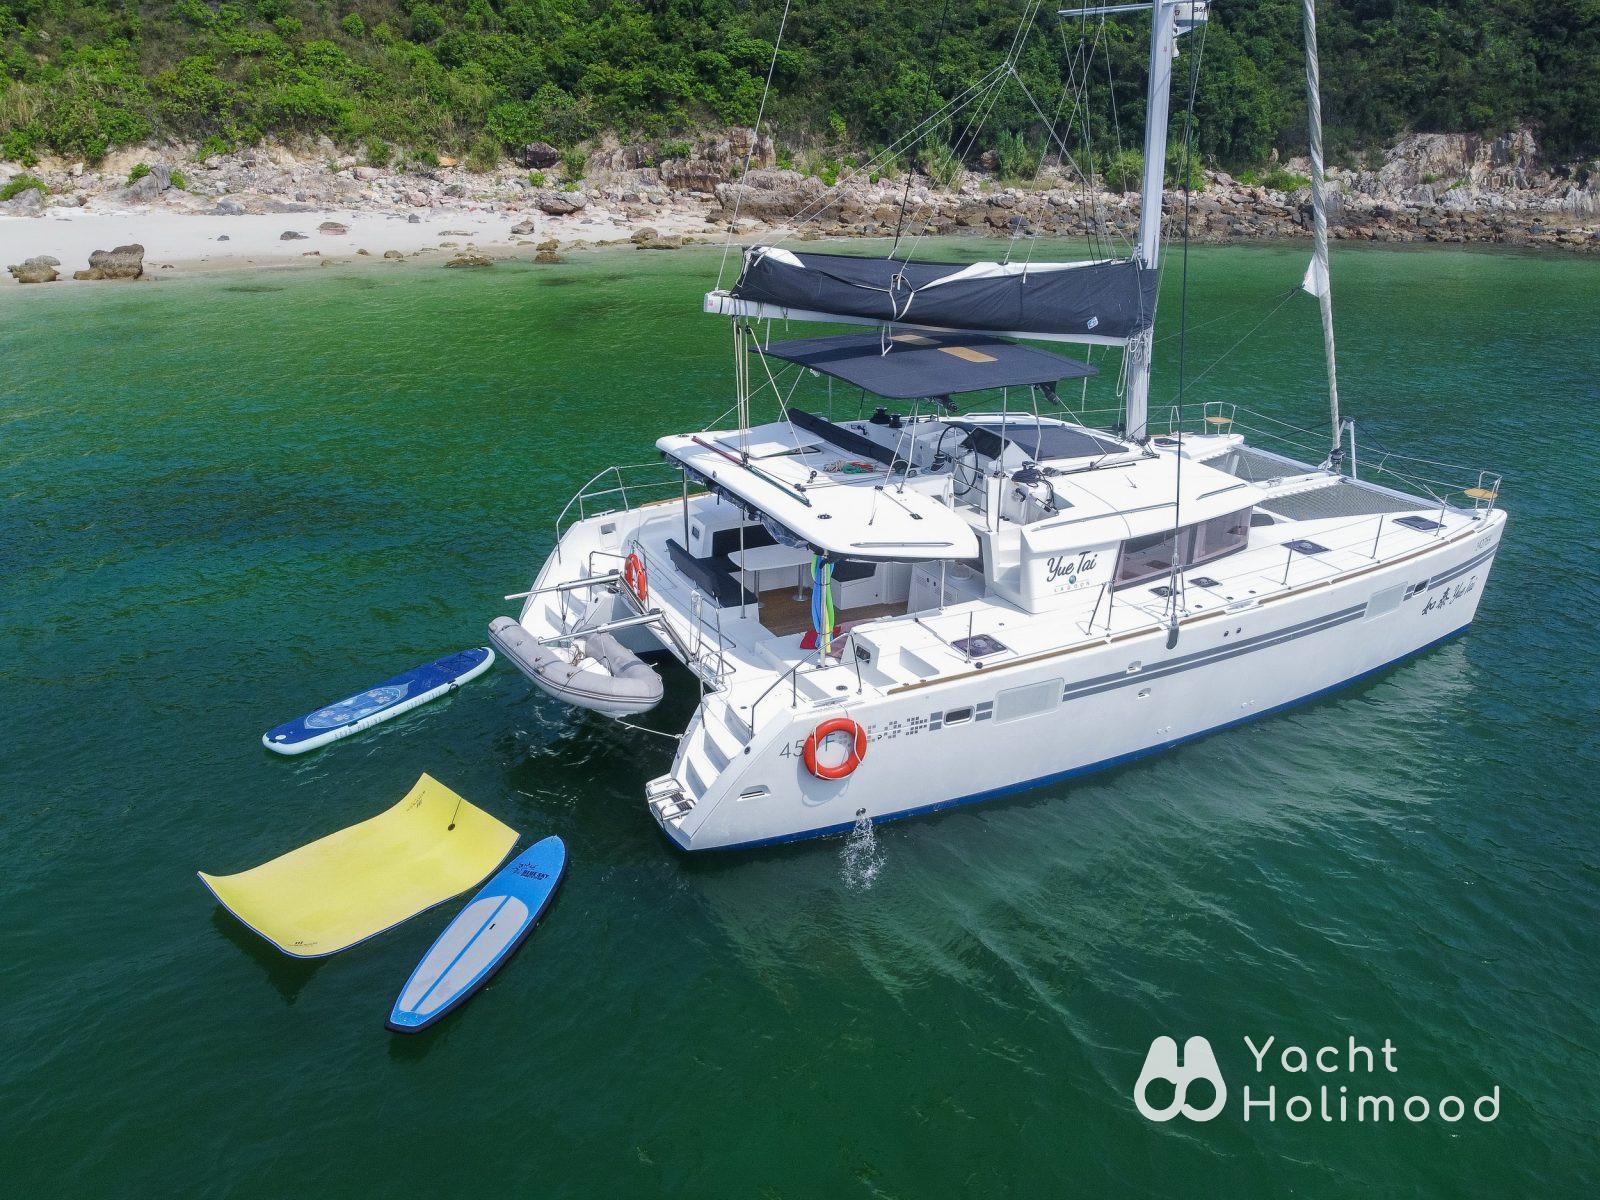 SL03 48-Hour Lagoon 450F 8-hour Luxury Sailing Day Trip (Pick Up at Sai Kung) 2